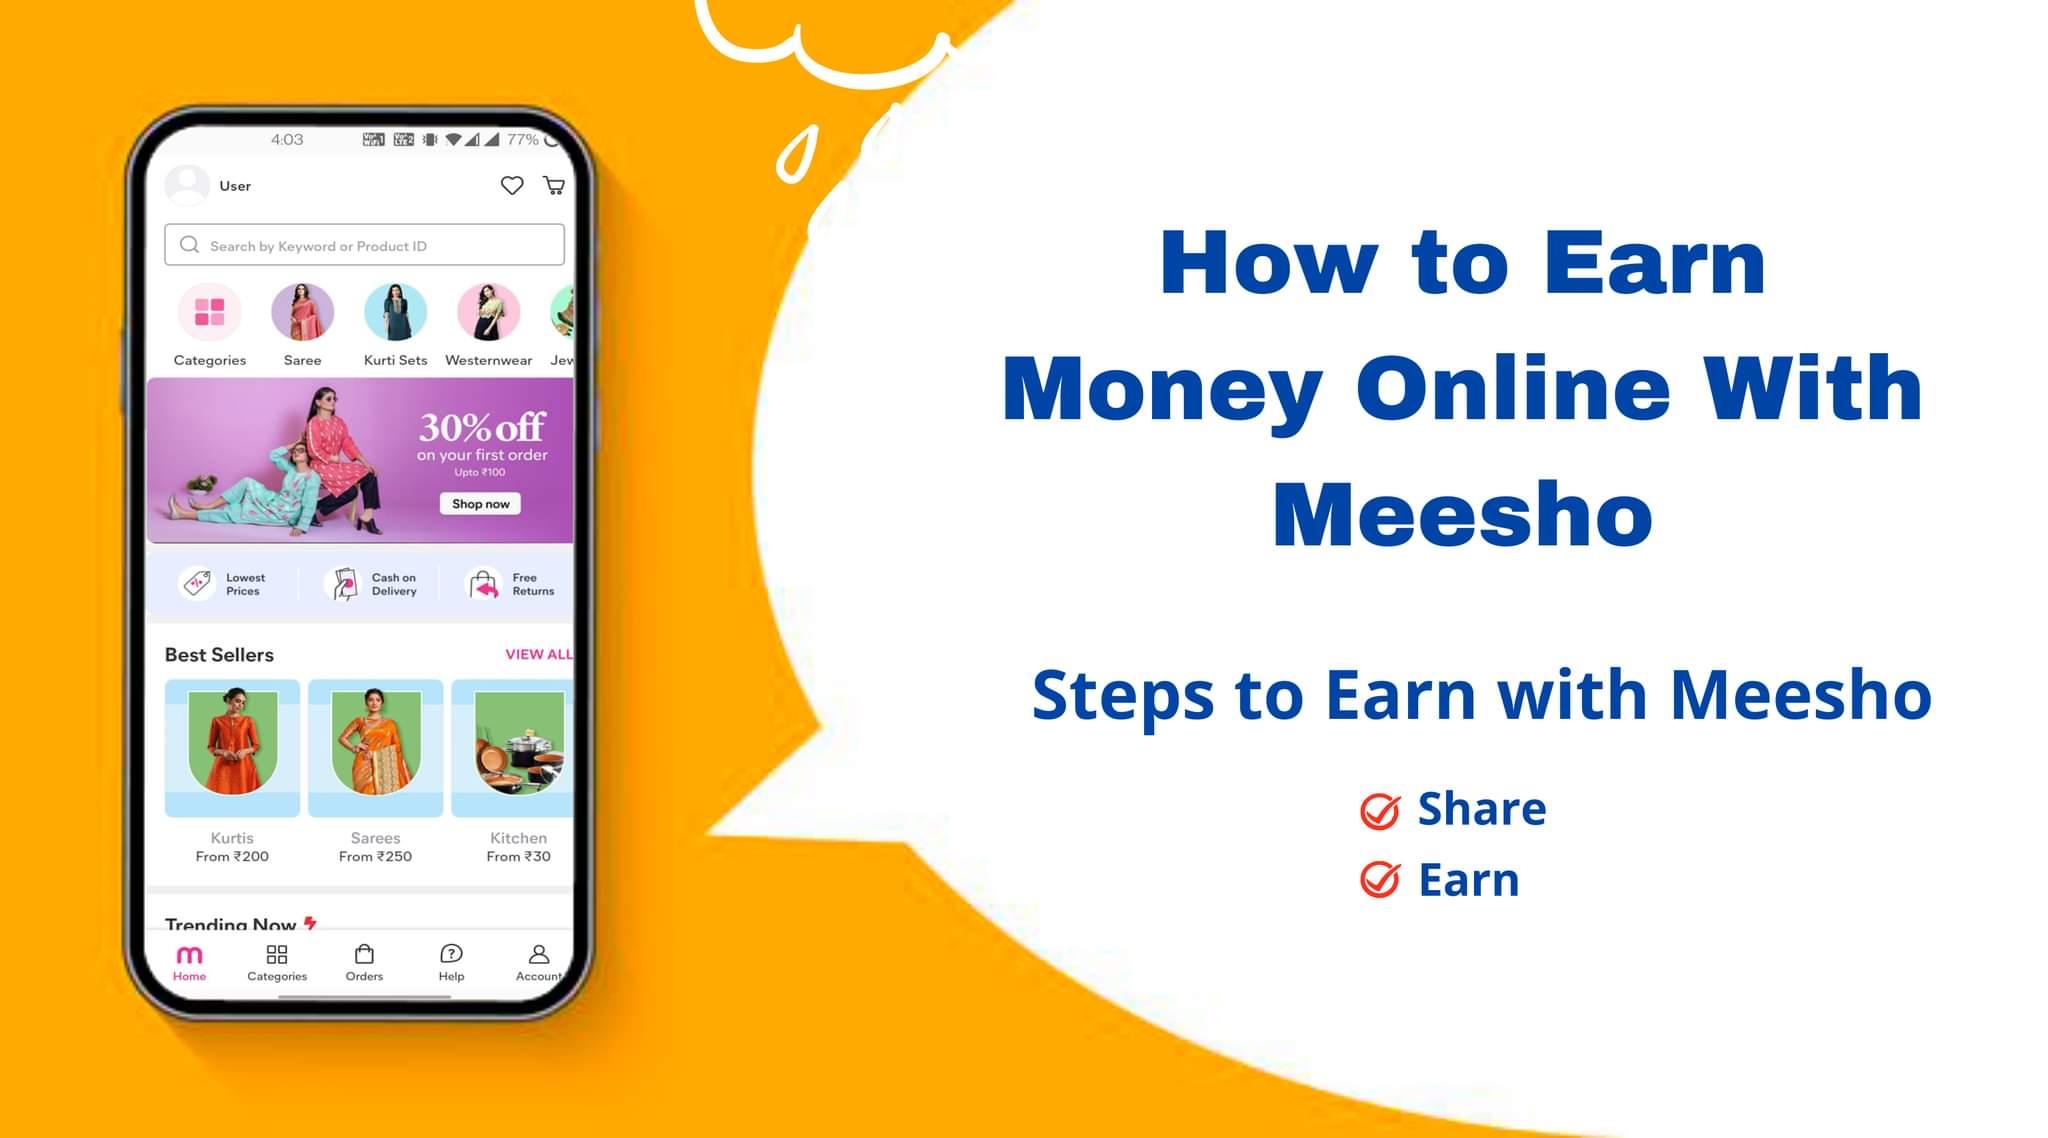 How to earn money Online with Meesho